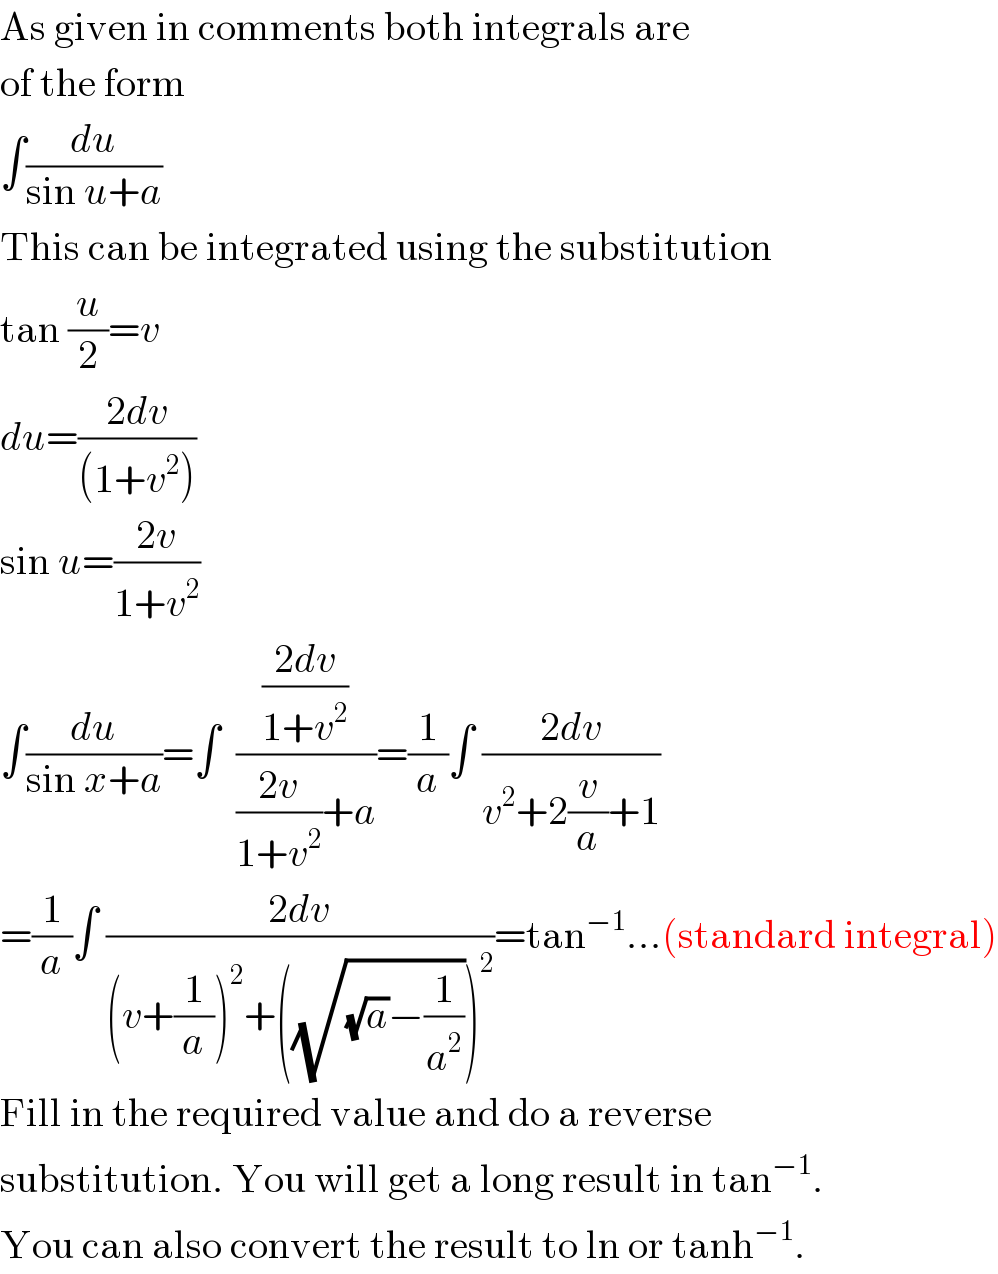 As given in comments both integrals are  of the form  ∫(du/(sin u+a))  This can be integrated using the substitution  tan (u/2)=v  du=((2dv)/((1+v^2 )))  sin u=((2v)/(1+v^2 ))  ∫(du/(sin x+a))=∫  (((2dv)/(1+v^2 ))/(((2v)/(1+v^2 ))+a))=(1/a)∫ ((2dv)/(v^2 +2(v/a)+1))  =(1/a)∫ ((2dv)/((v+(1/a))^2 +((√((√a)−(1/a^2 ))))^2 ))=tan^(−1) ...(standard integral)  Fill in the required value and do a reverse  substitution. You will get a long result in tan^(−1) .  You can also convert the result to ln or tanh^(−1) .  